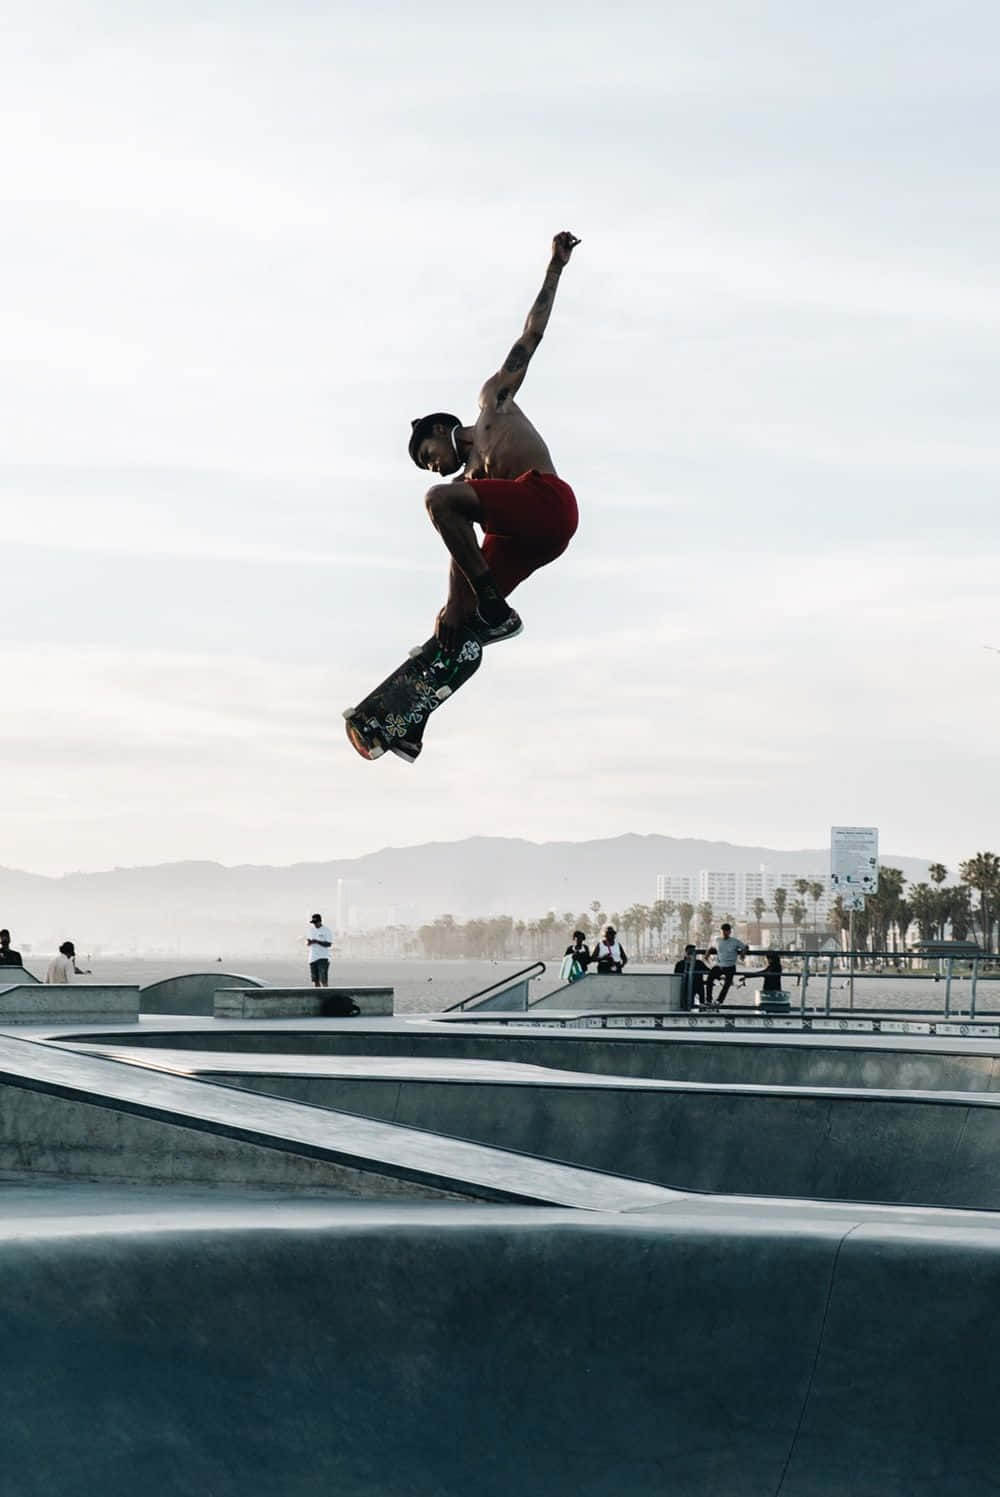 Skateboarder performing a trick on a ramp